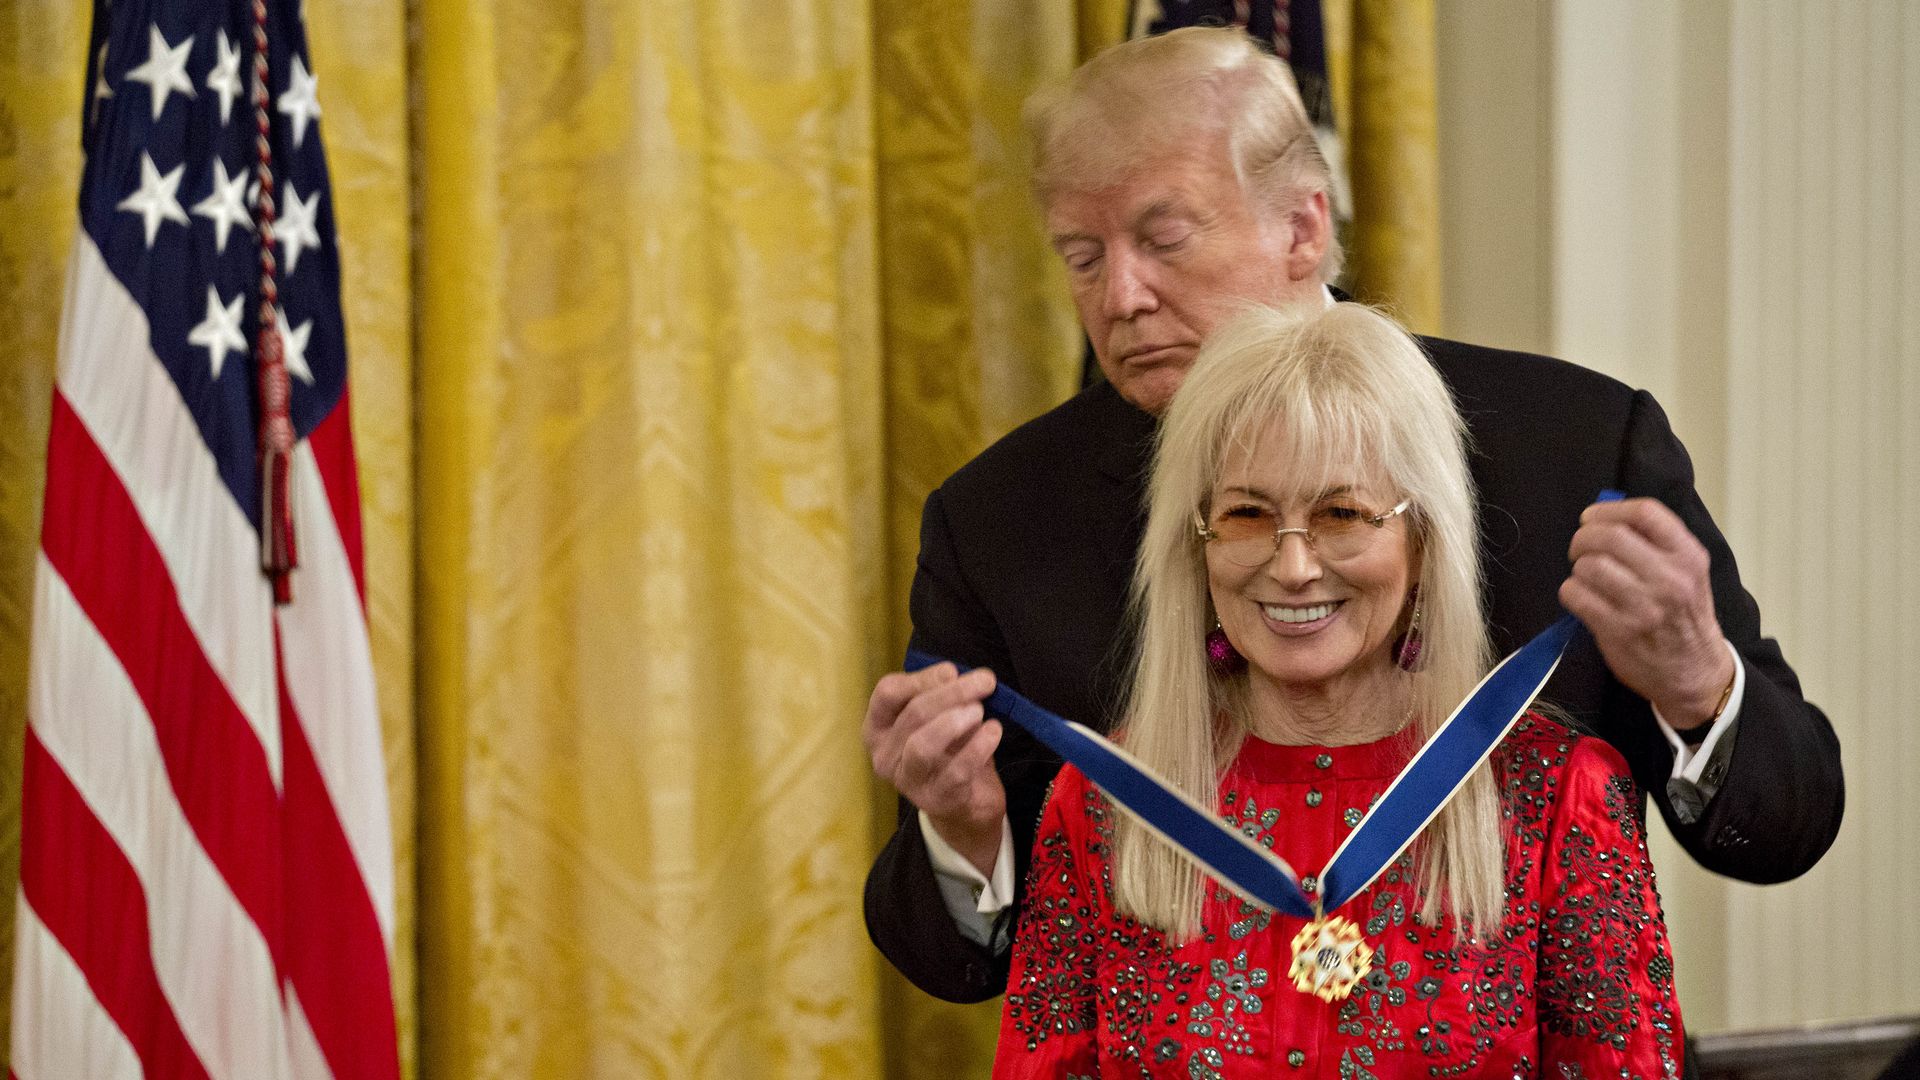 Former President Trump is seen presenting the Presidential Medal of Freedom to Miriam Adelson in 2018.